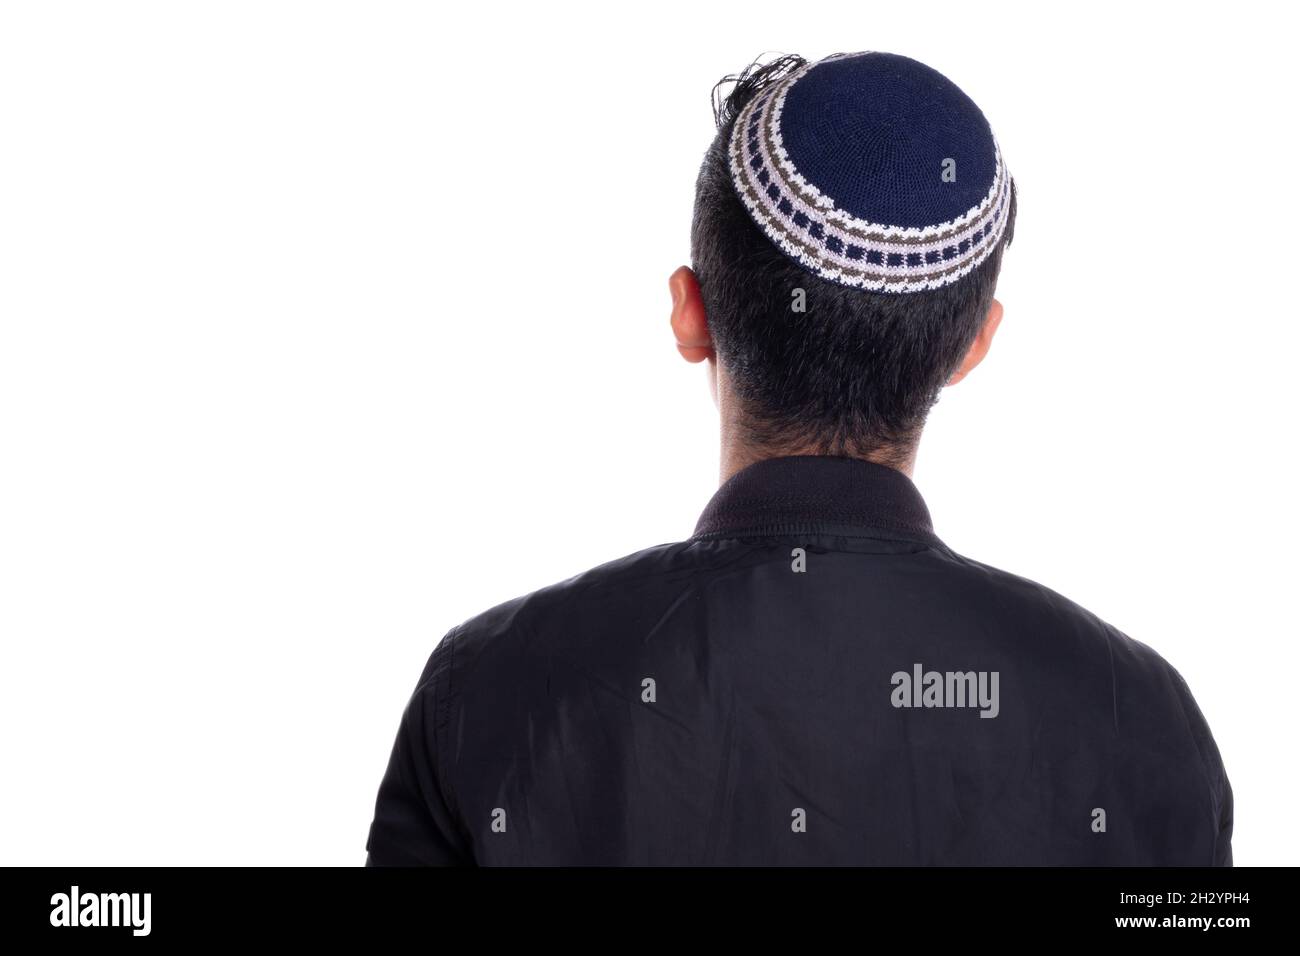 Man wearing kipa seen from the back, white background. religious person seen from behind. Stock Photo